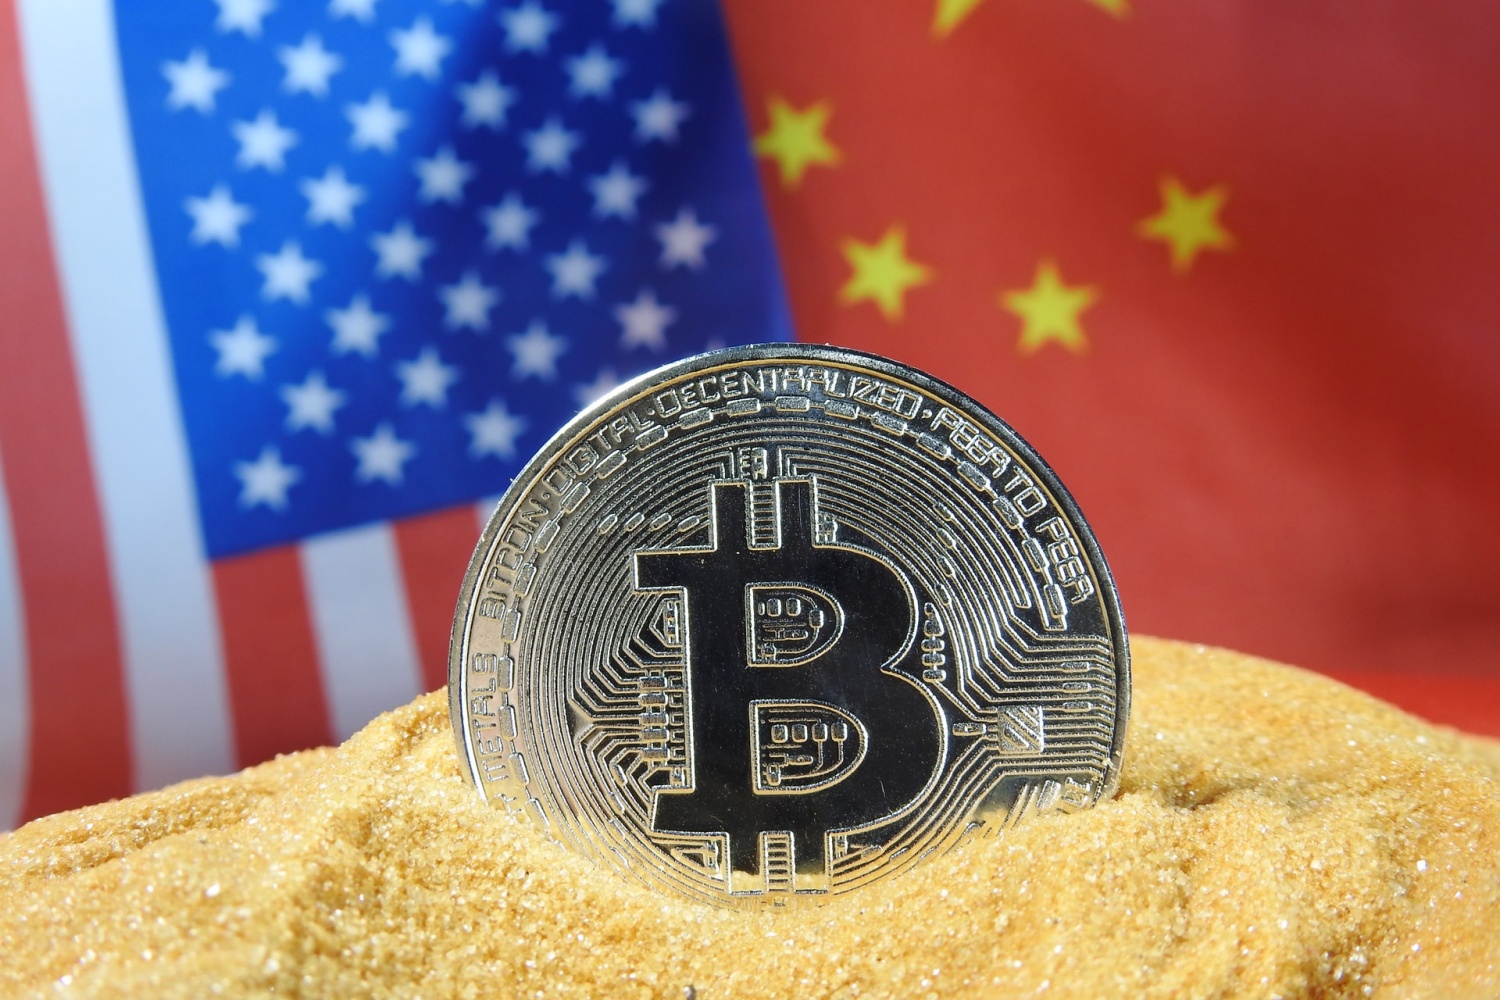 China's Digital Currency Could Challenge Bitcoin and Even the Dollar